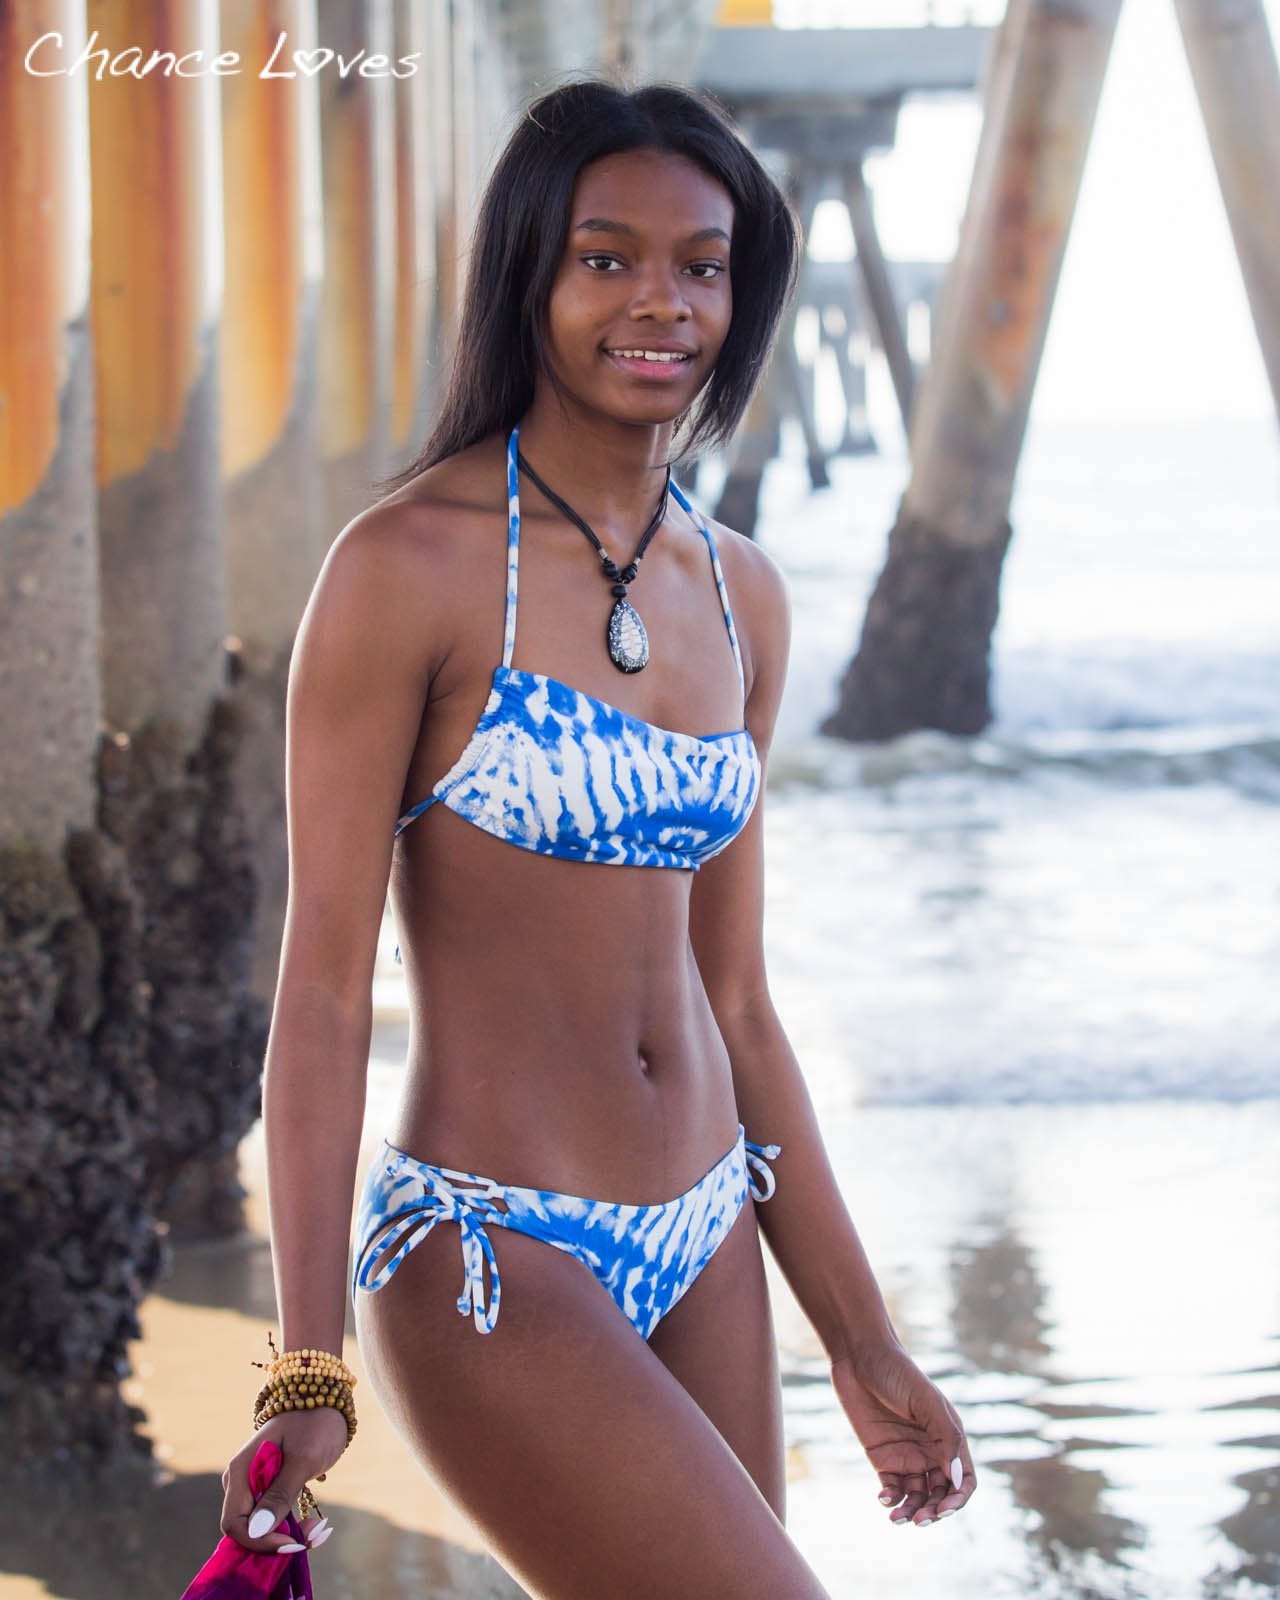 A drawstring blue and white Bando Bikini top and matching full coverage swim bottoms in Venice worn by a beautiful young woman